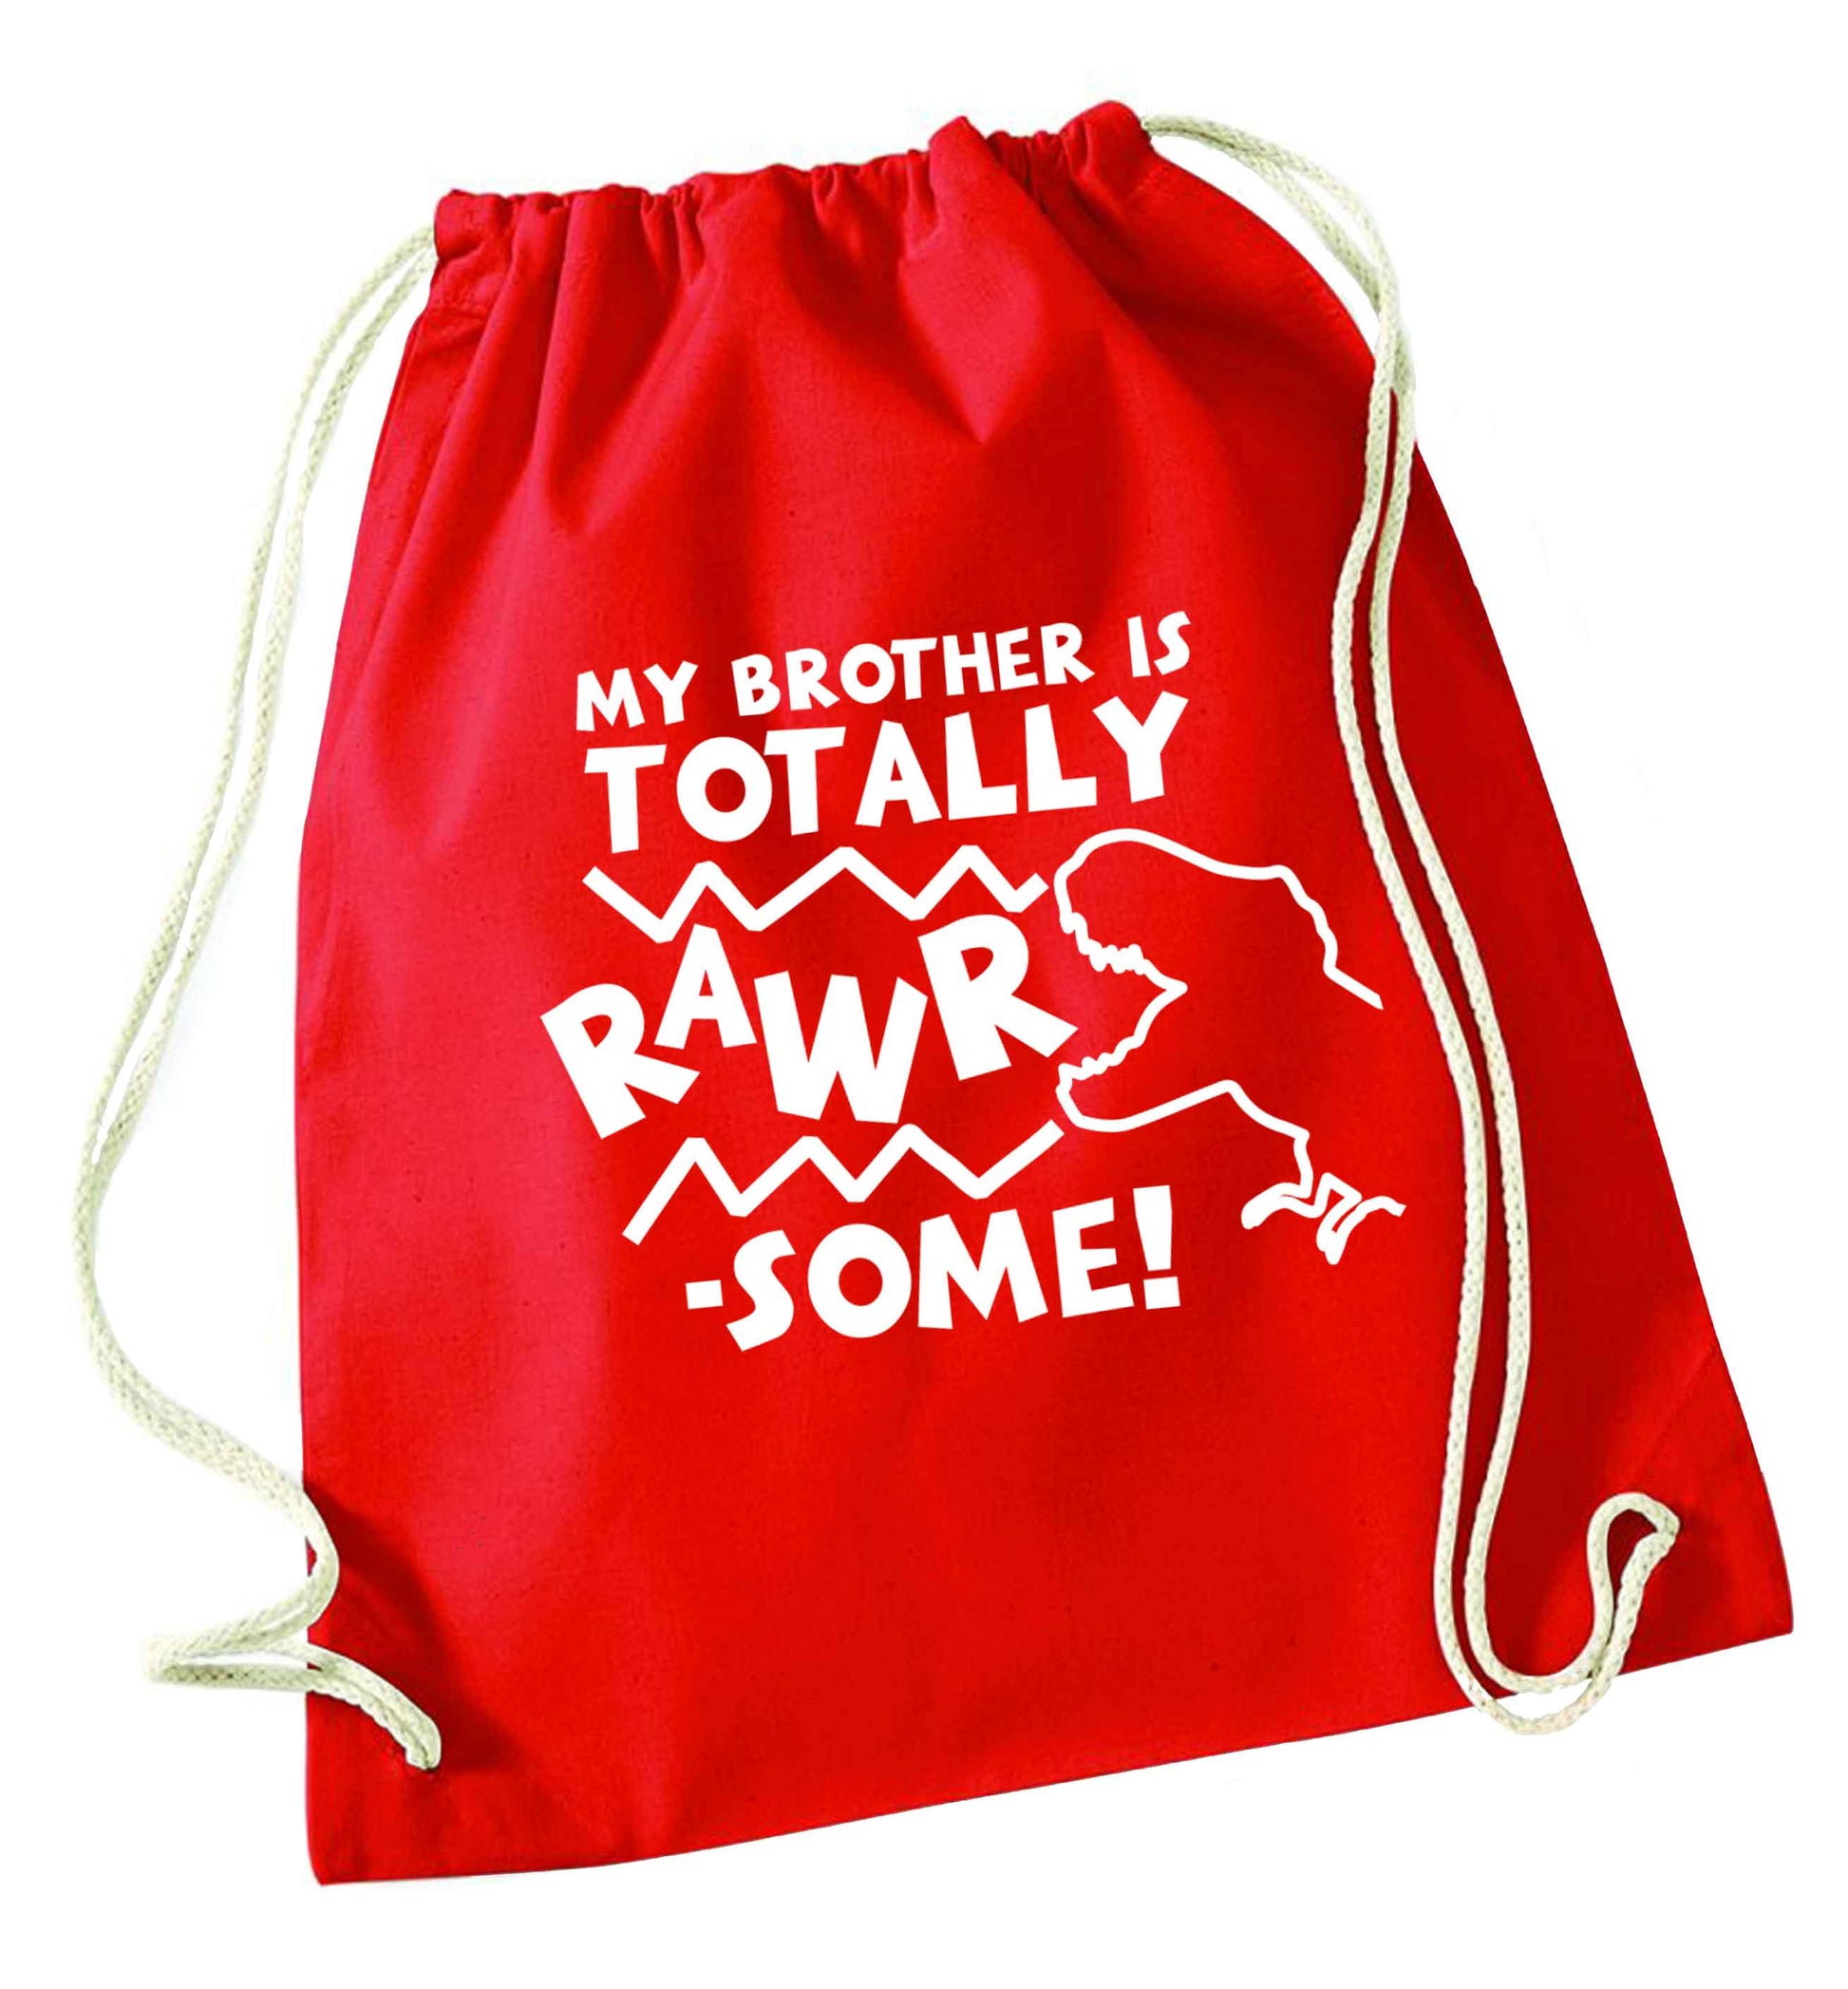 My brother is totally rawrsome red drawstring bag 